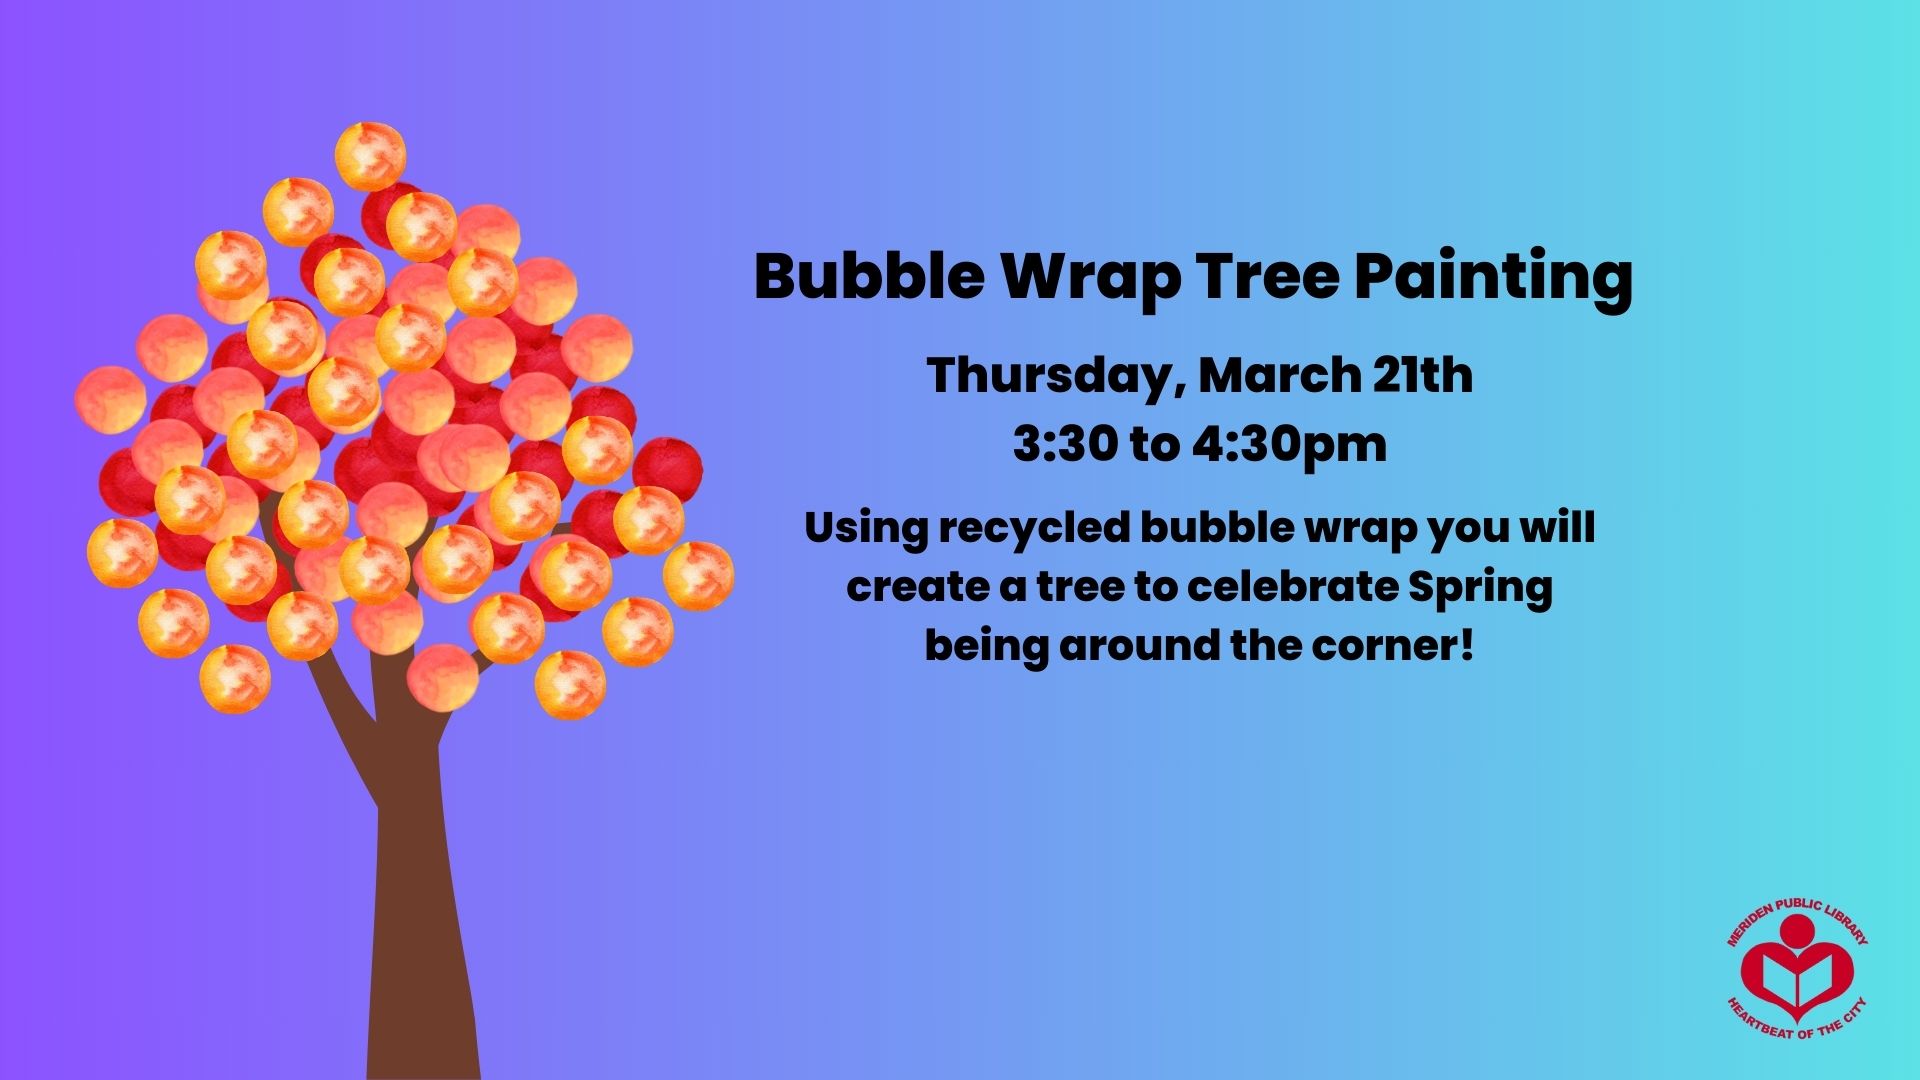 Example of the Bubble Wrap tree on the left, verbiage on the right